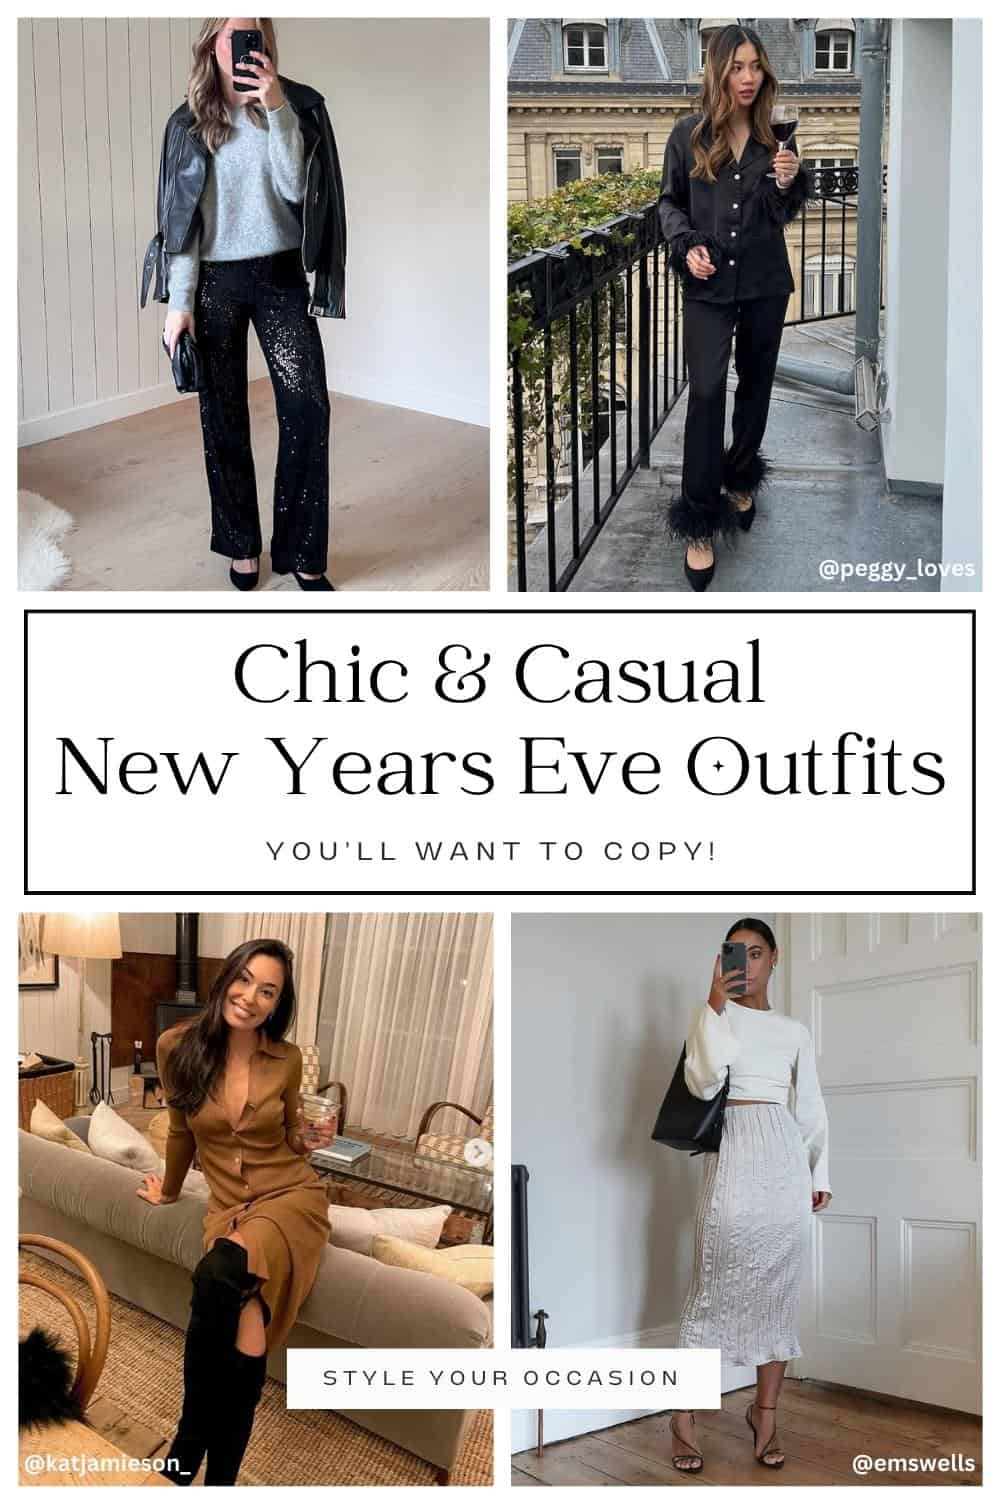 collage of four images of women wearing chic and casual New Years Eve outfits with black and neutrals